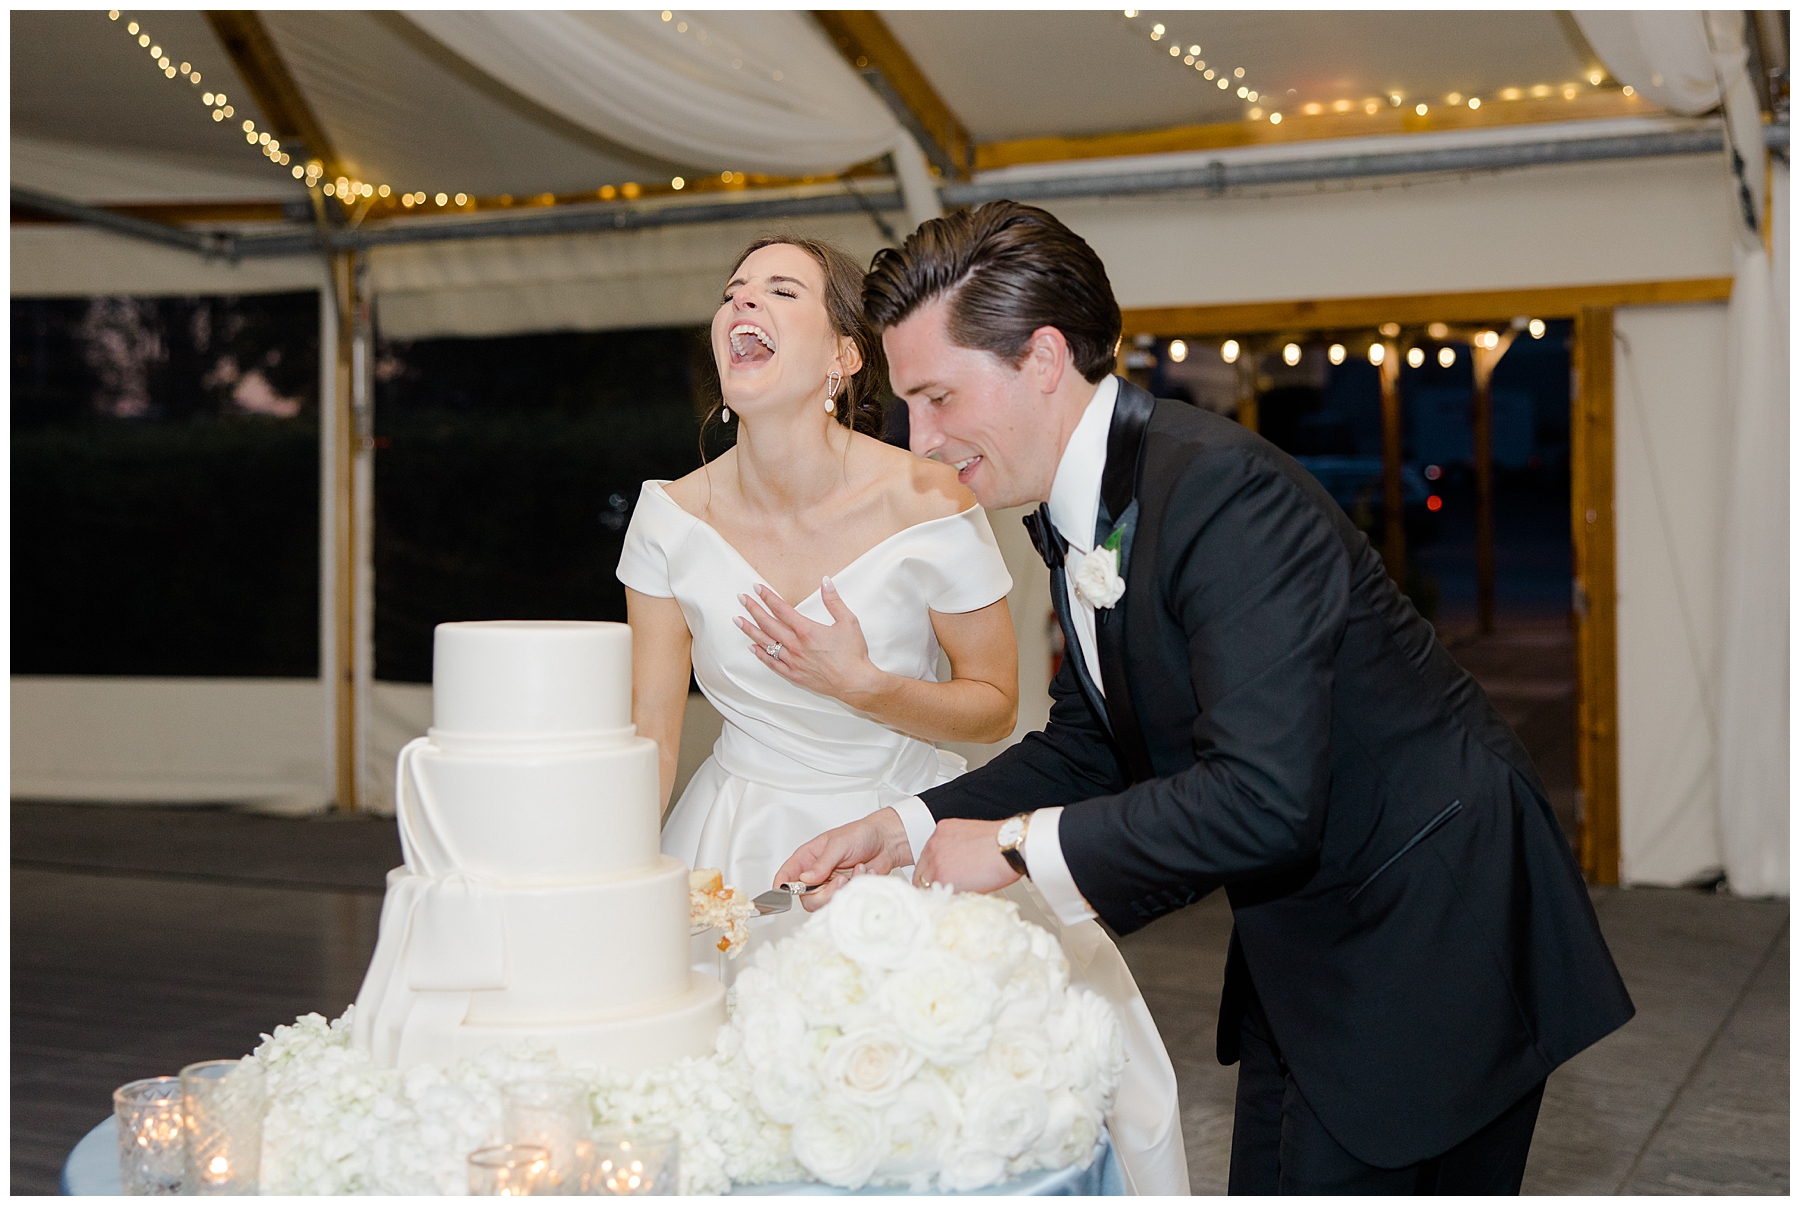 candid moment as couple cut their wedding cake